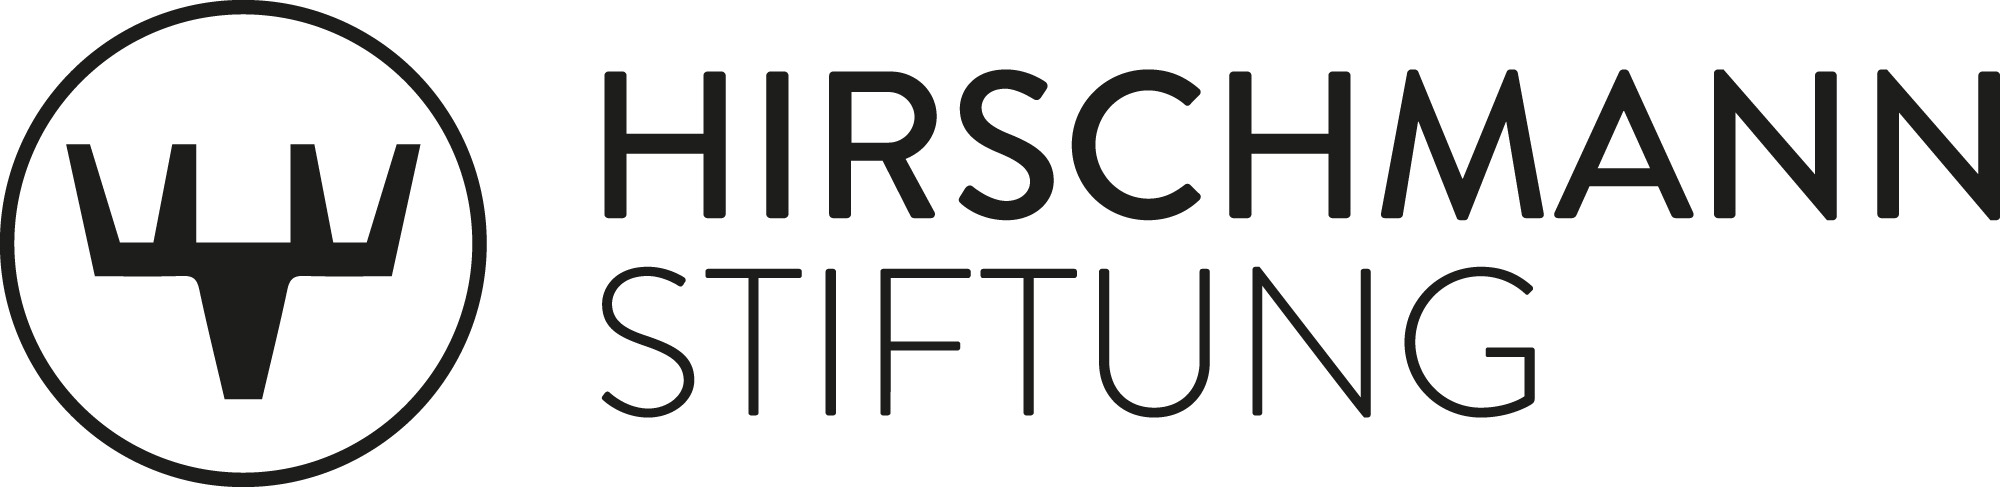 Black and white logo for the company Hirschmann Stiftung Zweizeilig